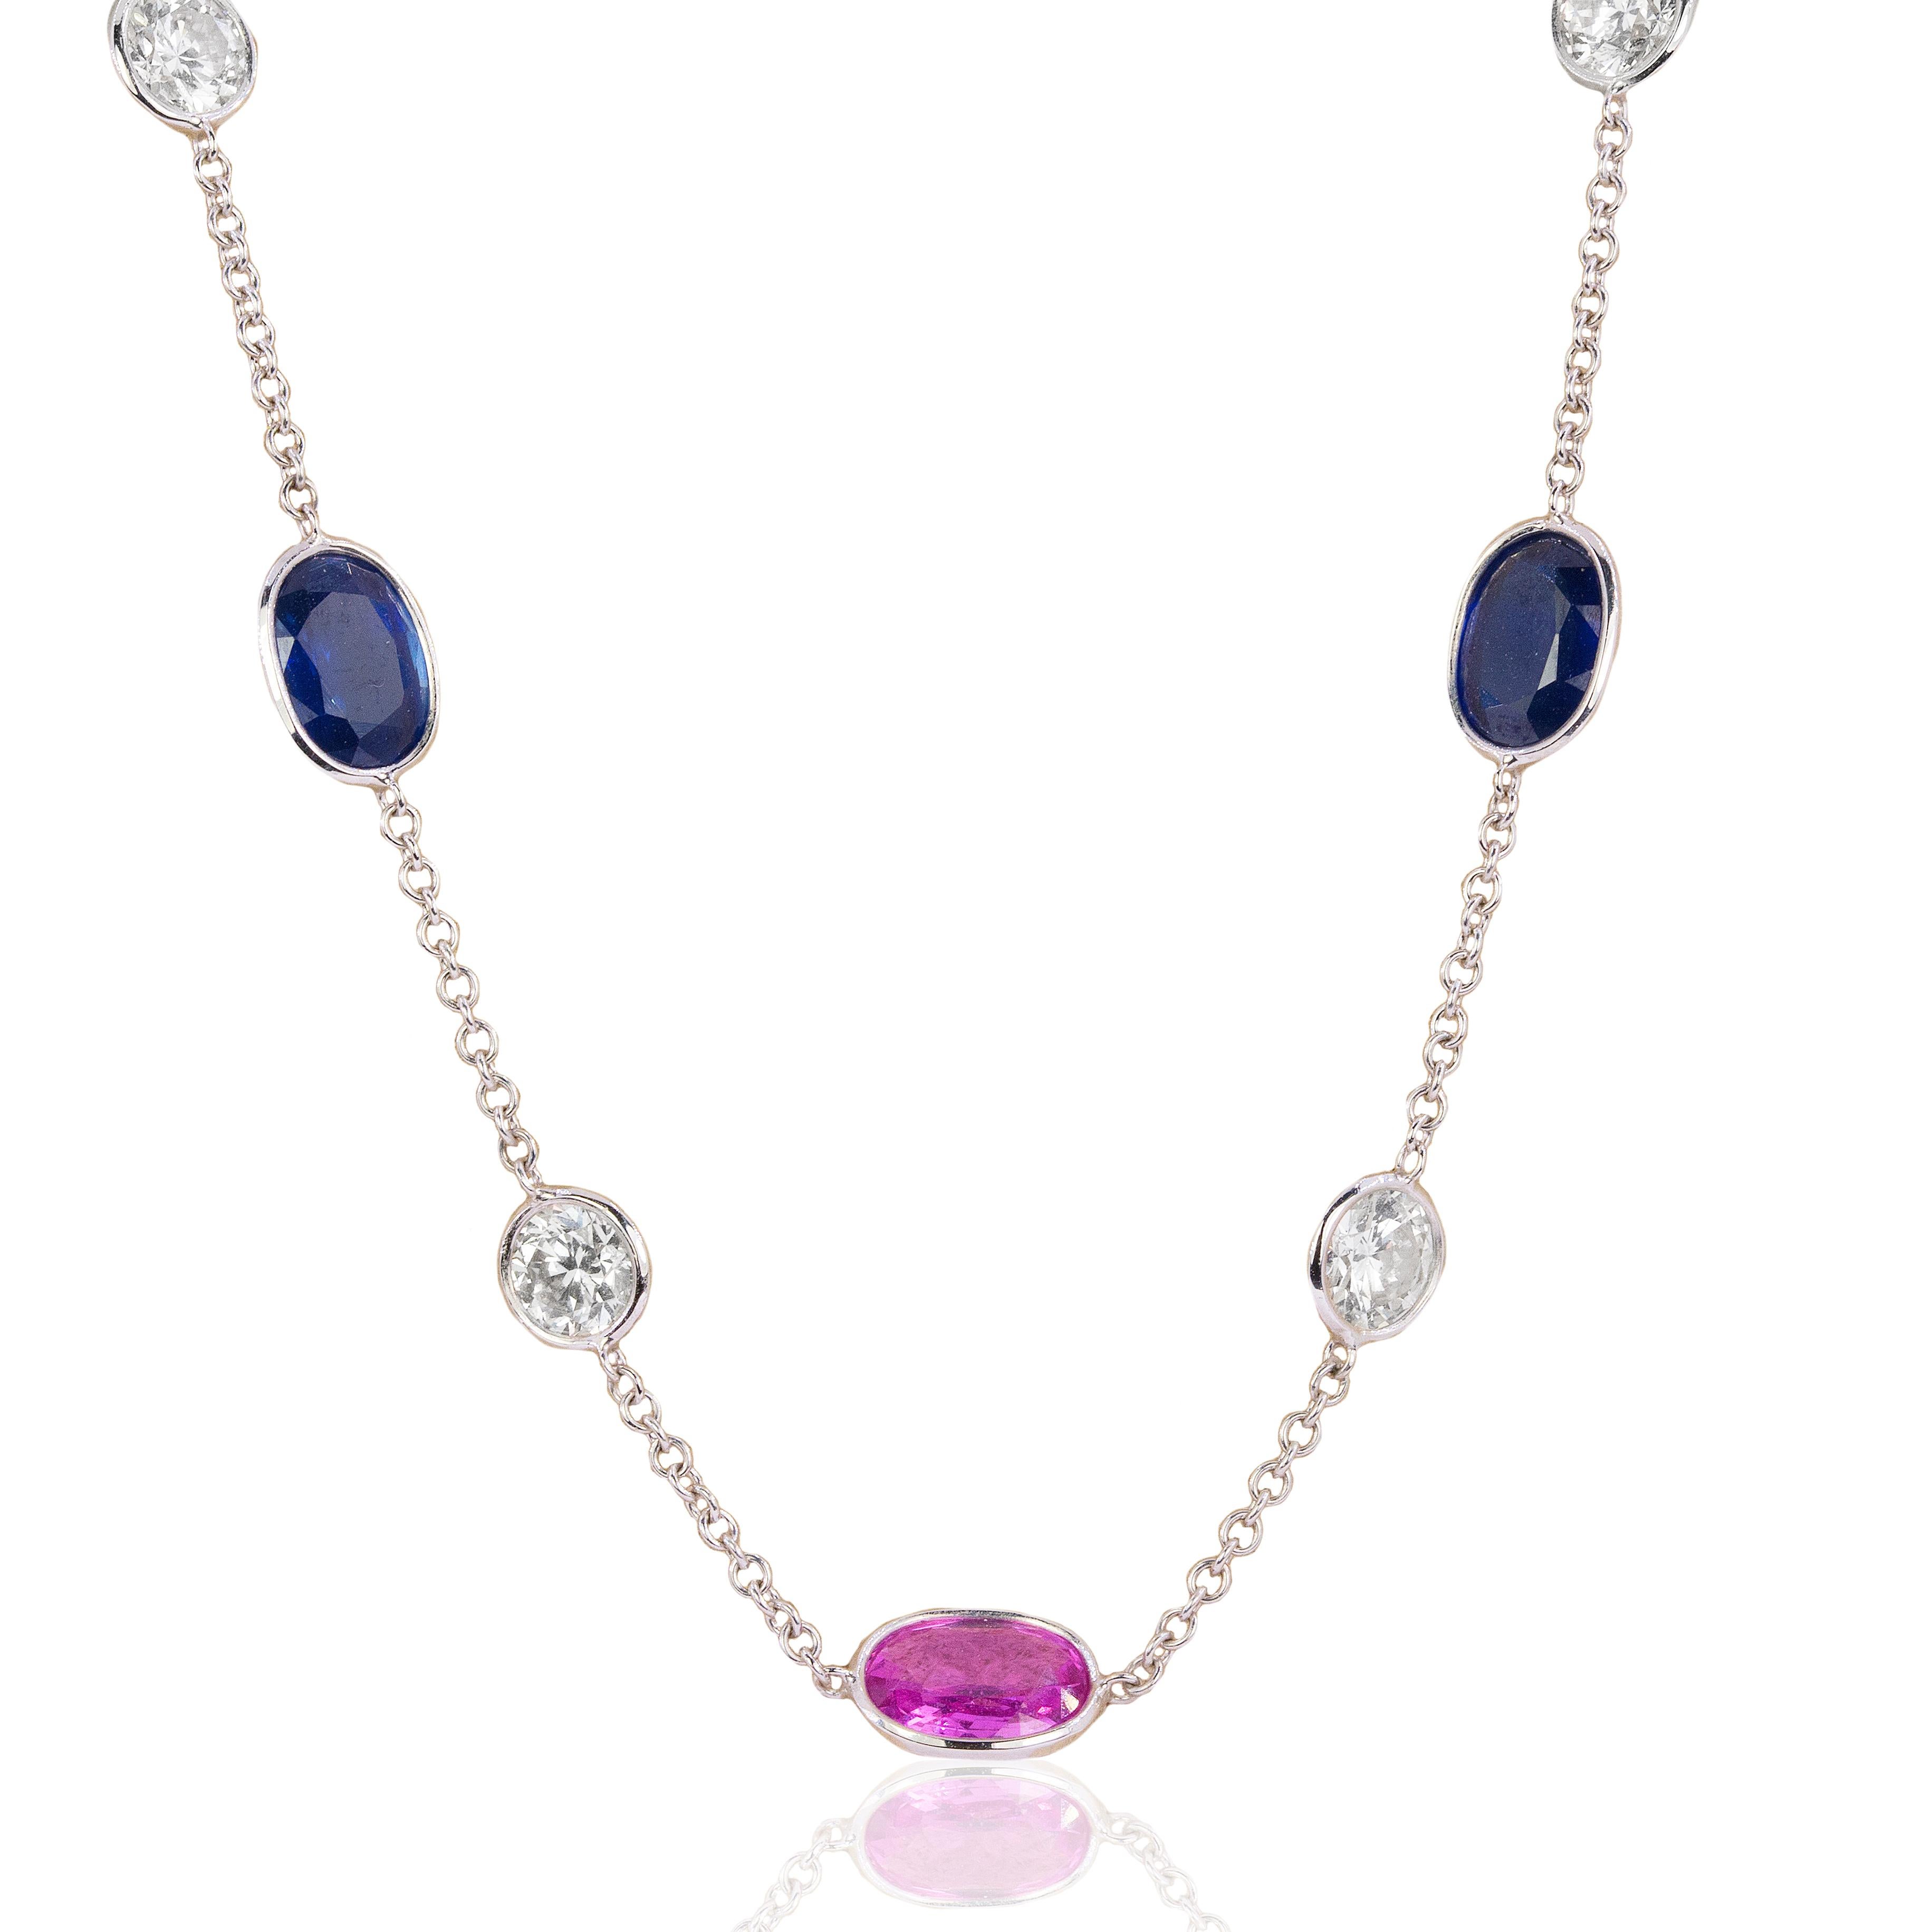 18k Neckalce with 3 pink sapphires weighing 4.01 carats and 5 blue sapphires weighing 6.28 carats and 12 diamonds weighing 5.08 carats